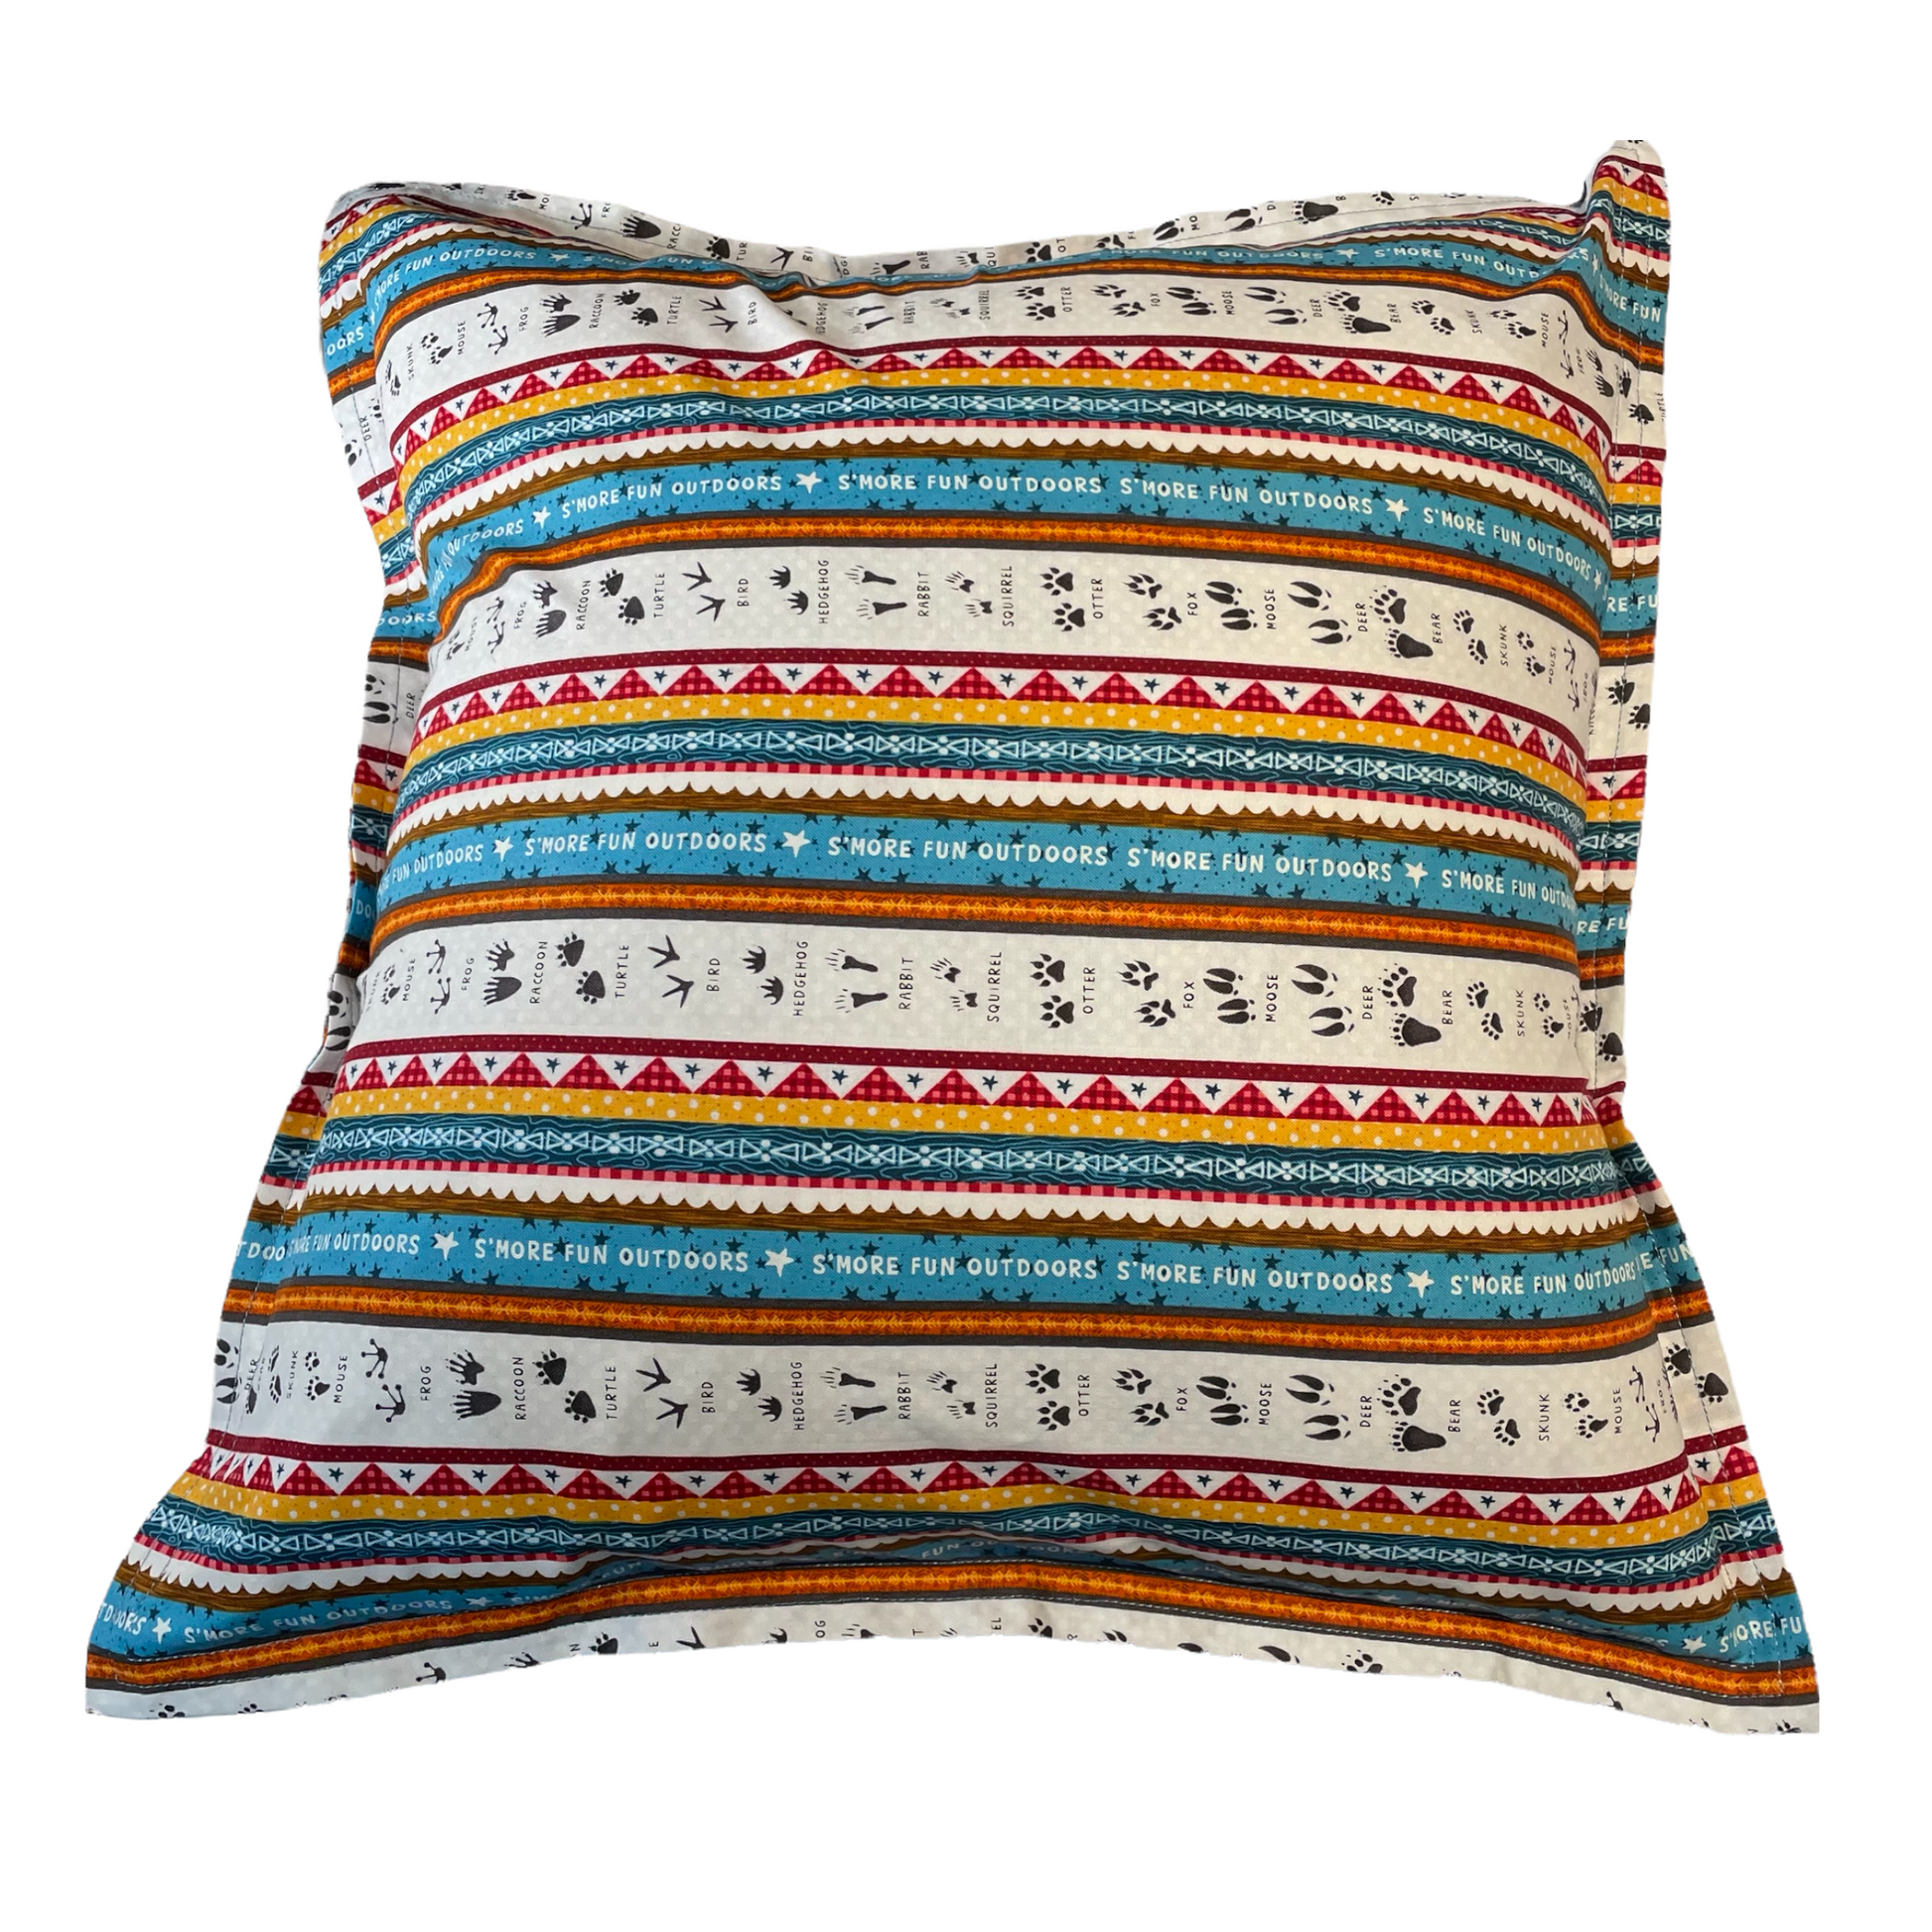 Camping Decorative Pillow for your RV, Camper Decor. Let's go camping with mix and match decor. Shop the collection and follow along on the Home Stitchery Decor YouTube Channel. Pillow in white, teal, red, yellow and black. Woodland tracks camping themed pillow.